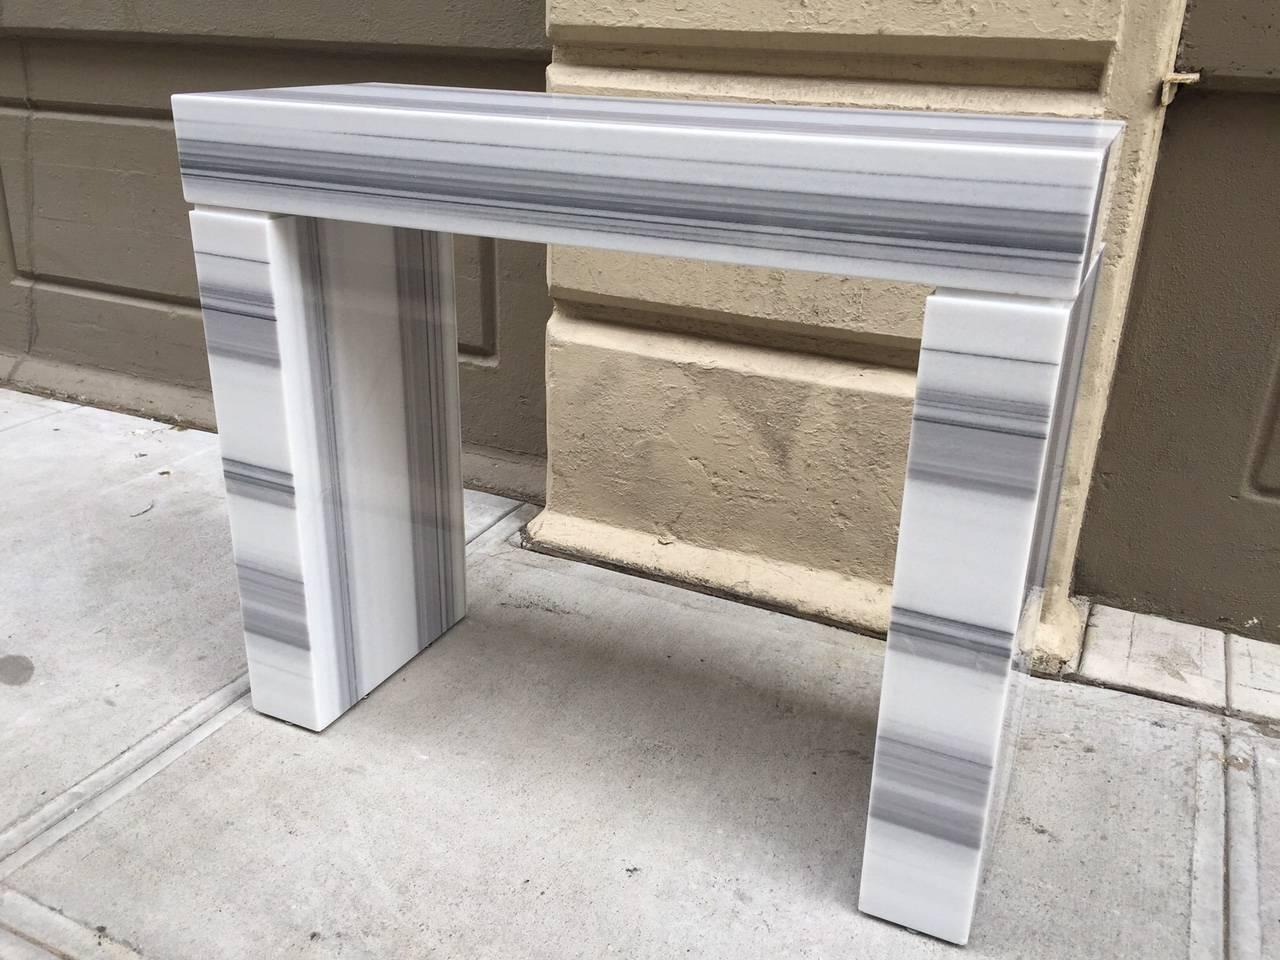 Carrara marble console / fireplace mantel in three parts. Nice shades of gray.